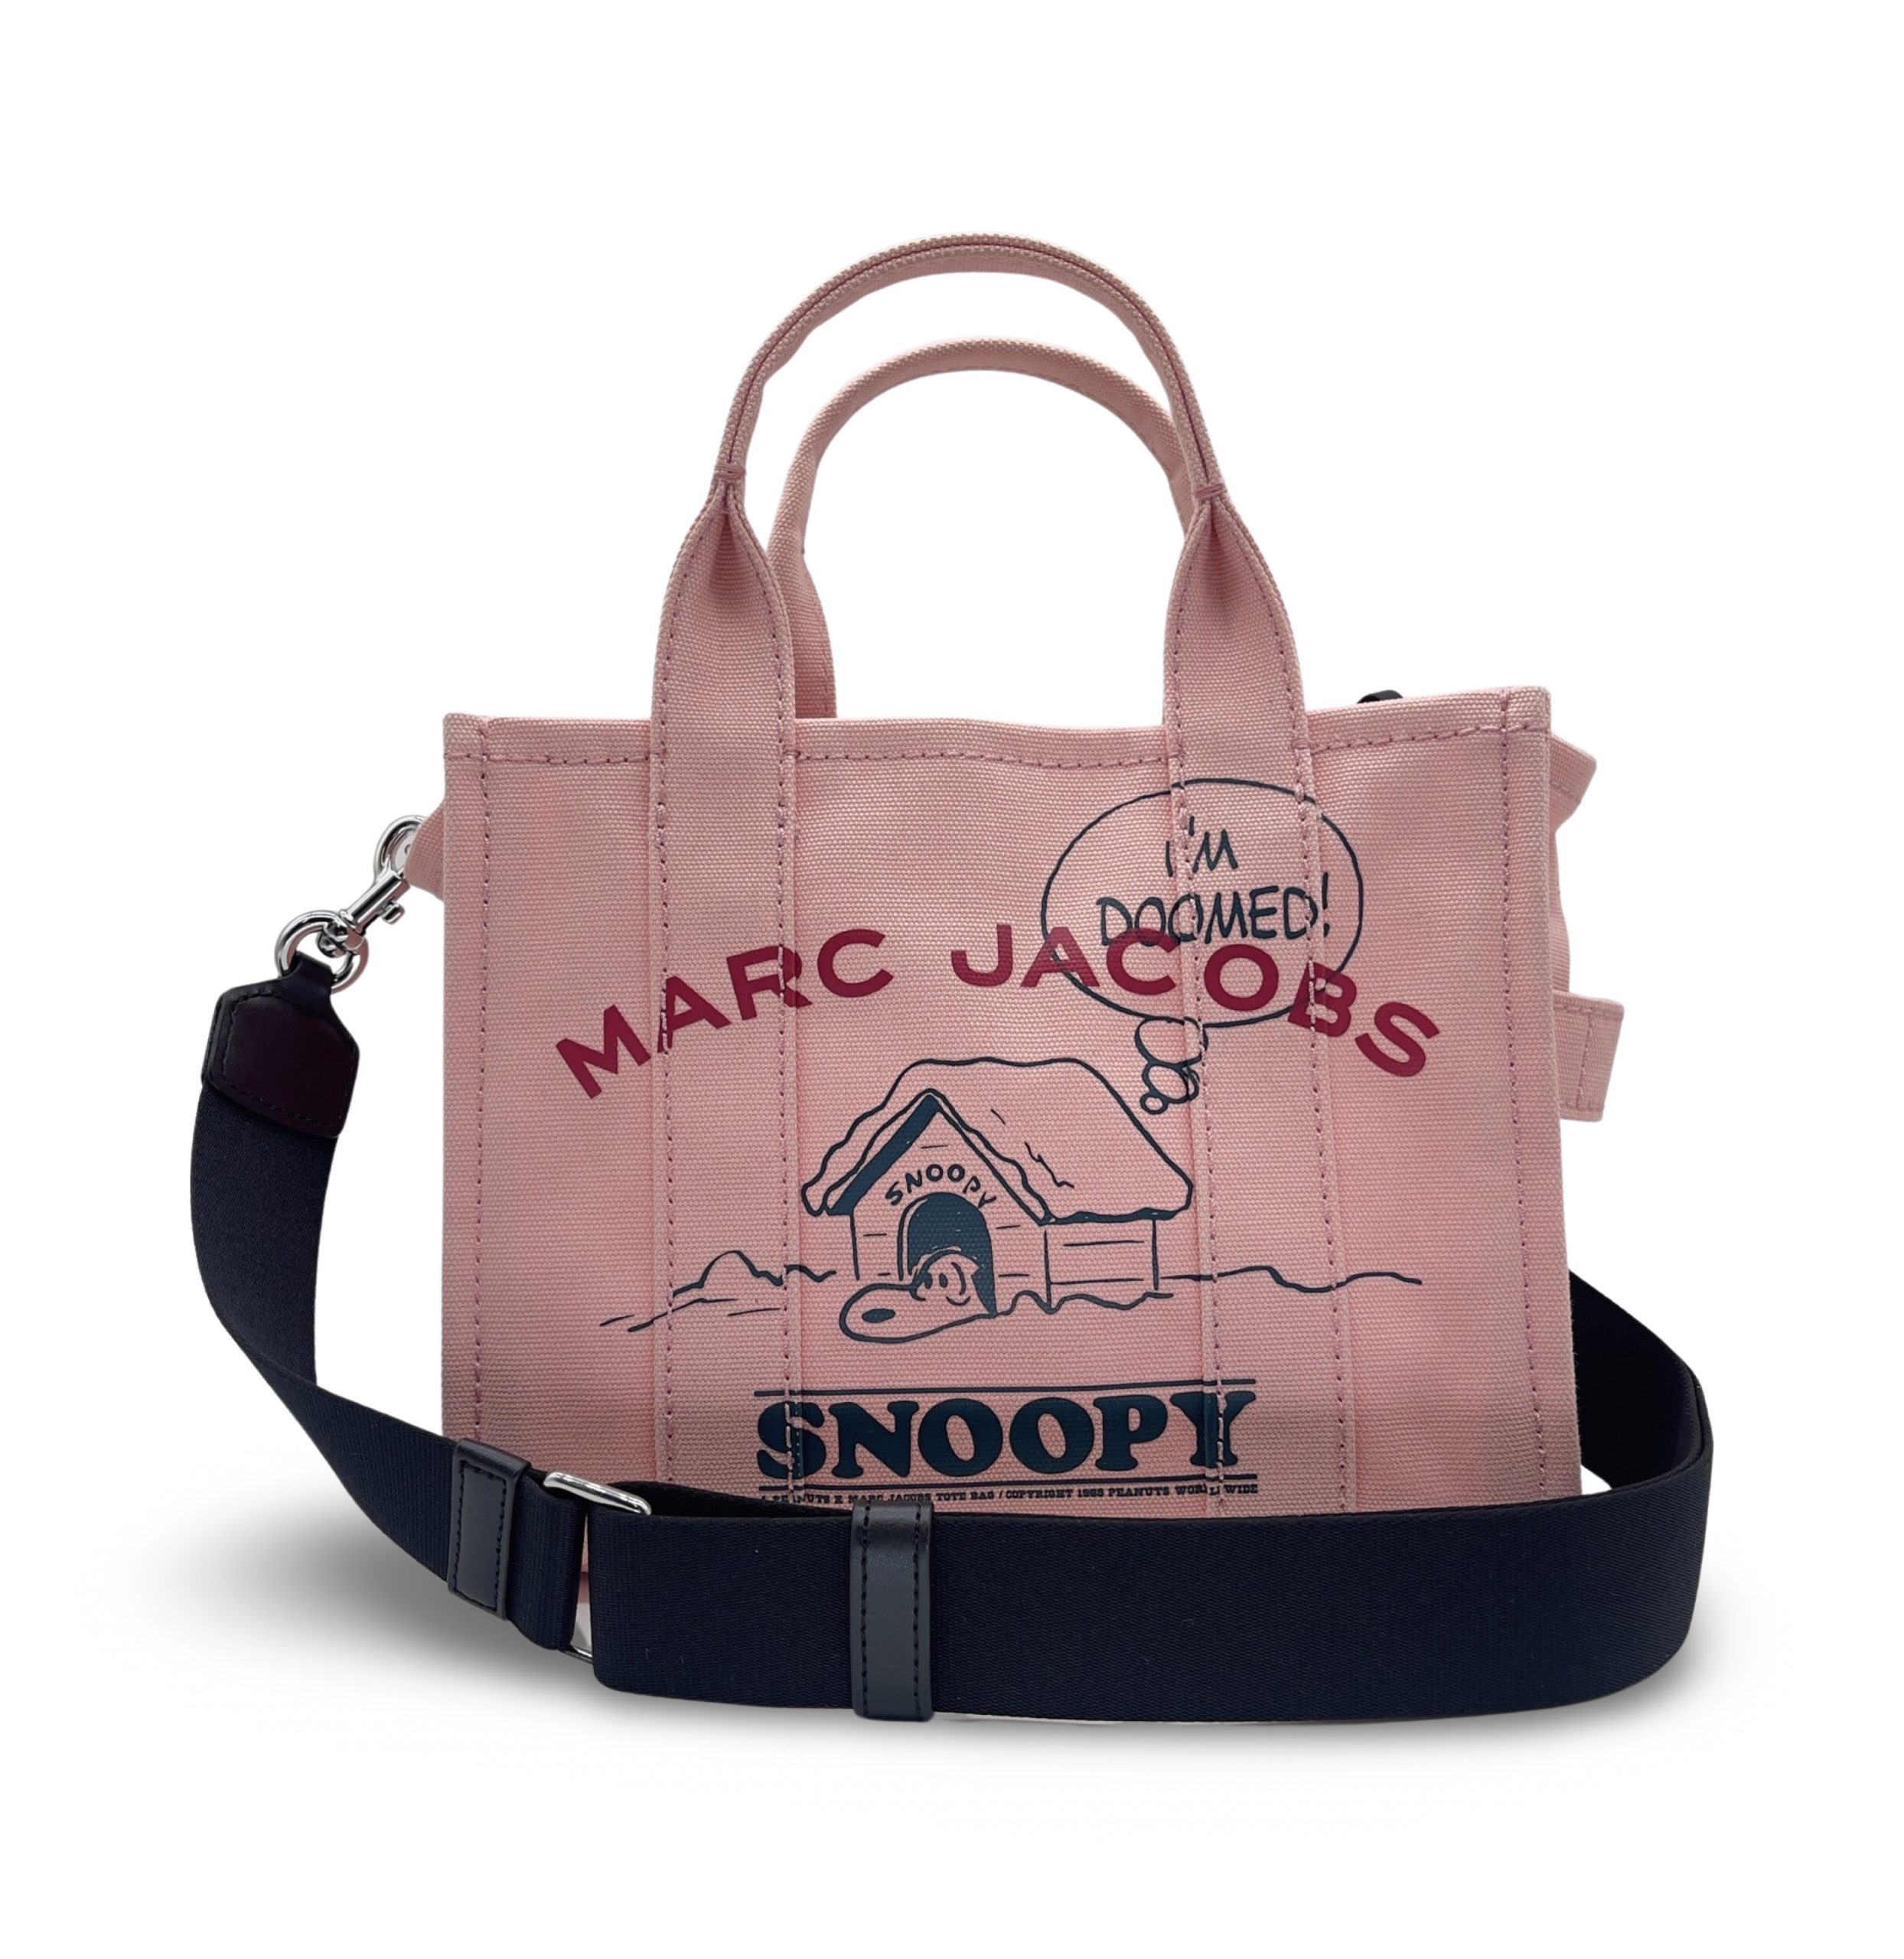 Peanuts Snoopy Far Out Tote Bag | Urban Outfitters Mexico - Clothing,  Music, Home & Accessories